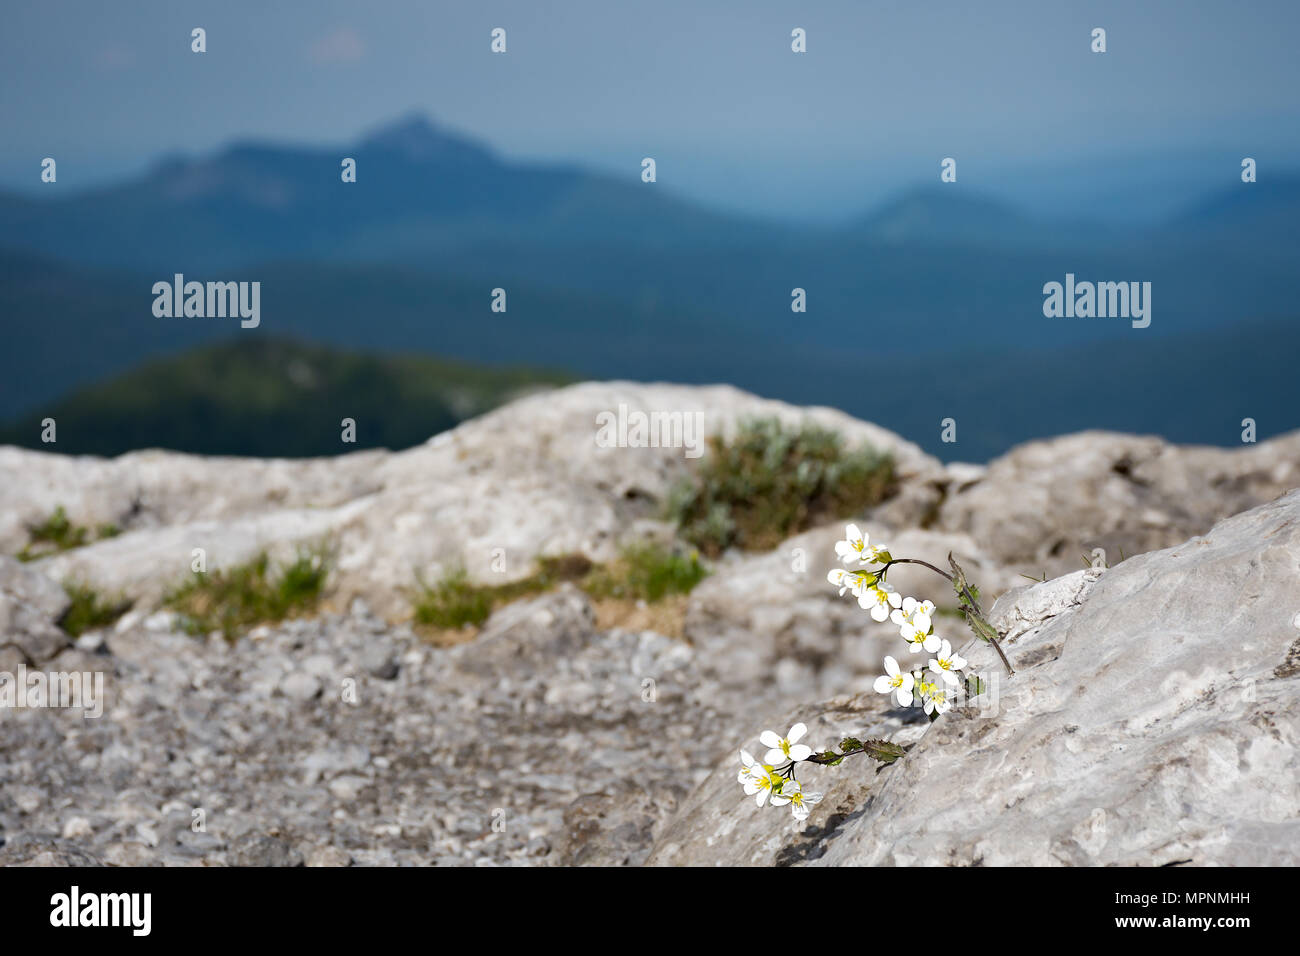 White flowers growing out of the rock, with mountains in a blurred distance. Taken along Via Dinarica, in nature reserve Bijele stijene, Croatia. Stock Photo